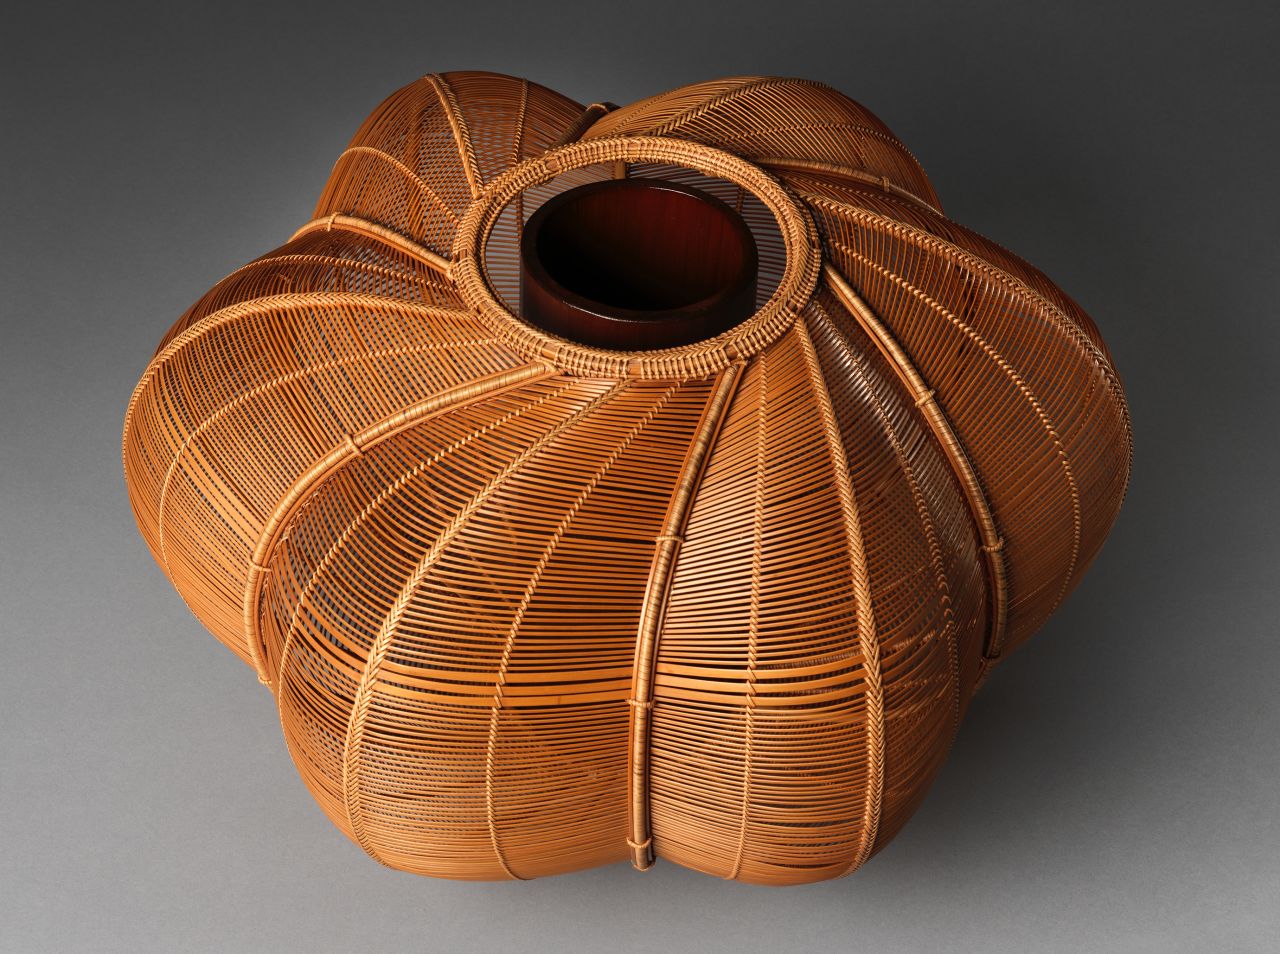 Bamboo artists still draw on the the practical items that the tradition once yielded -- kitchen utensils, baskets and boxes.